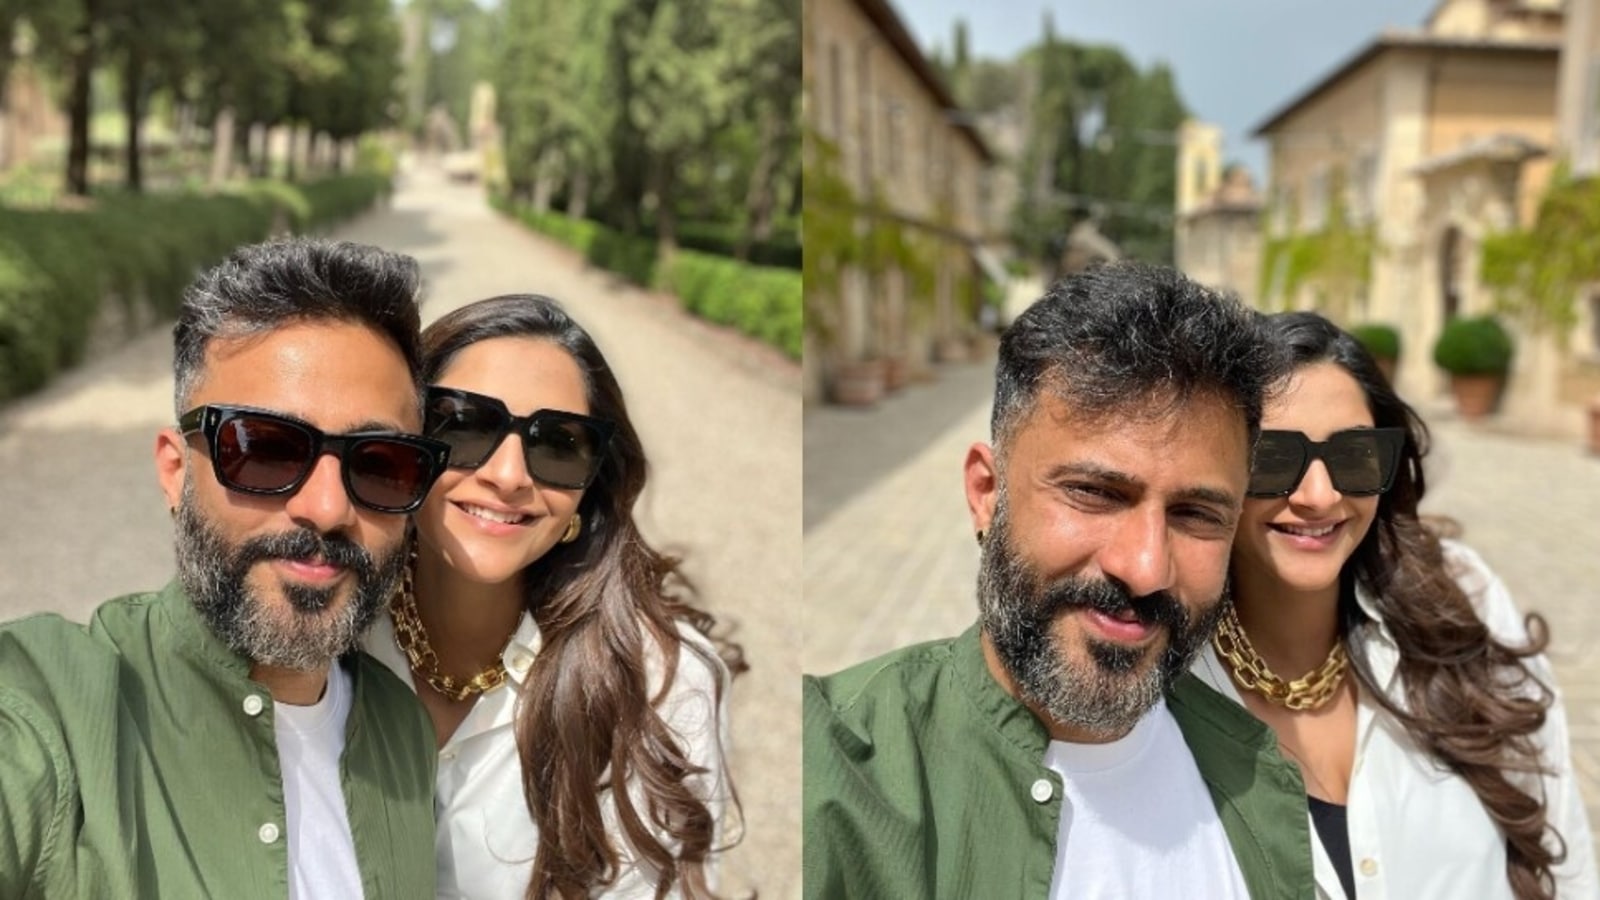 Sonam Kapoor reacts as Anand Ahuja says ‘excited, ready as ever for our next chapter’. See their pics from Italy